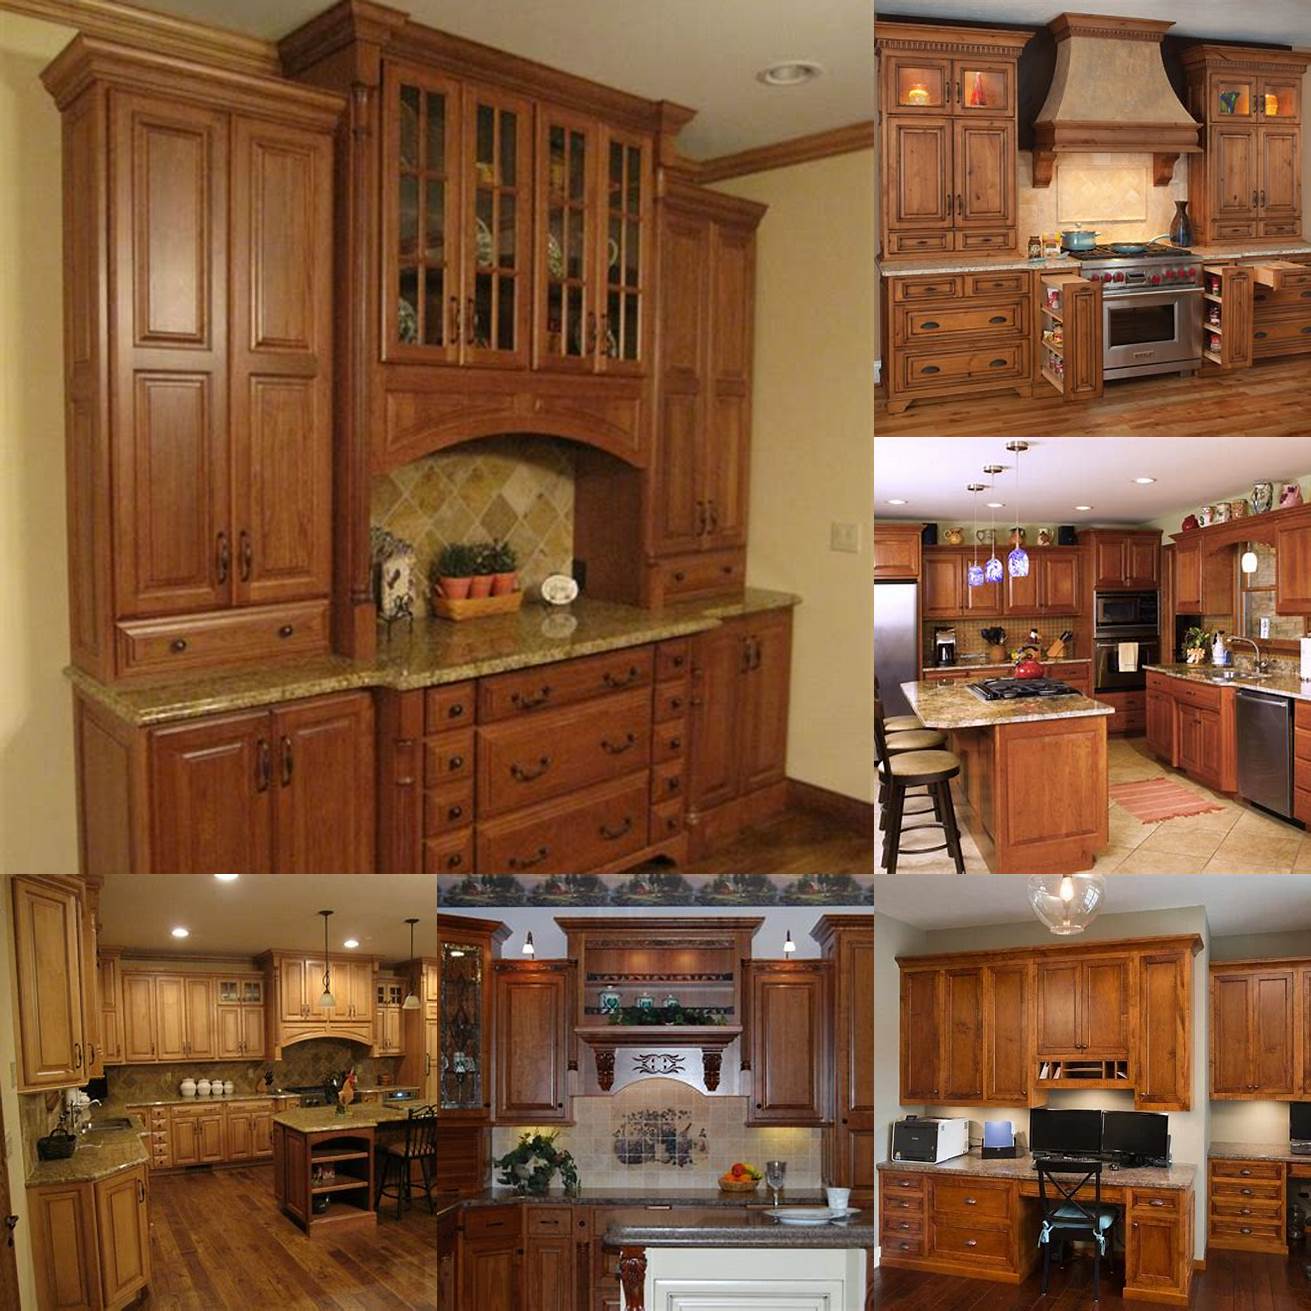 Customizable features of Amish kitchen cabinets